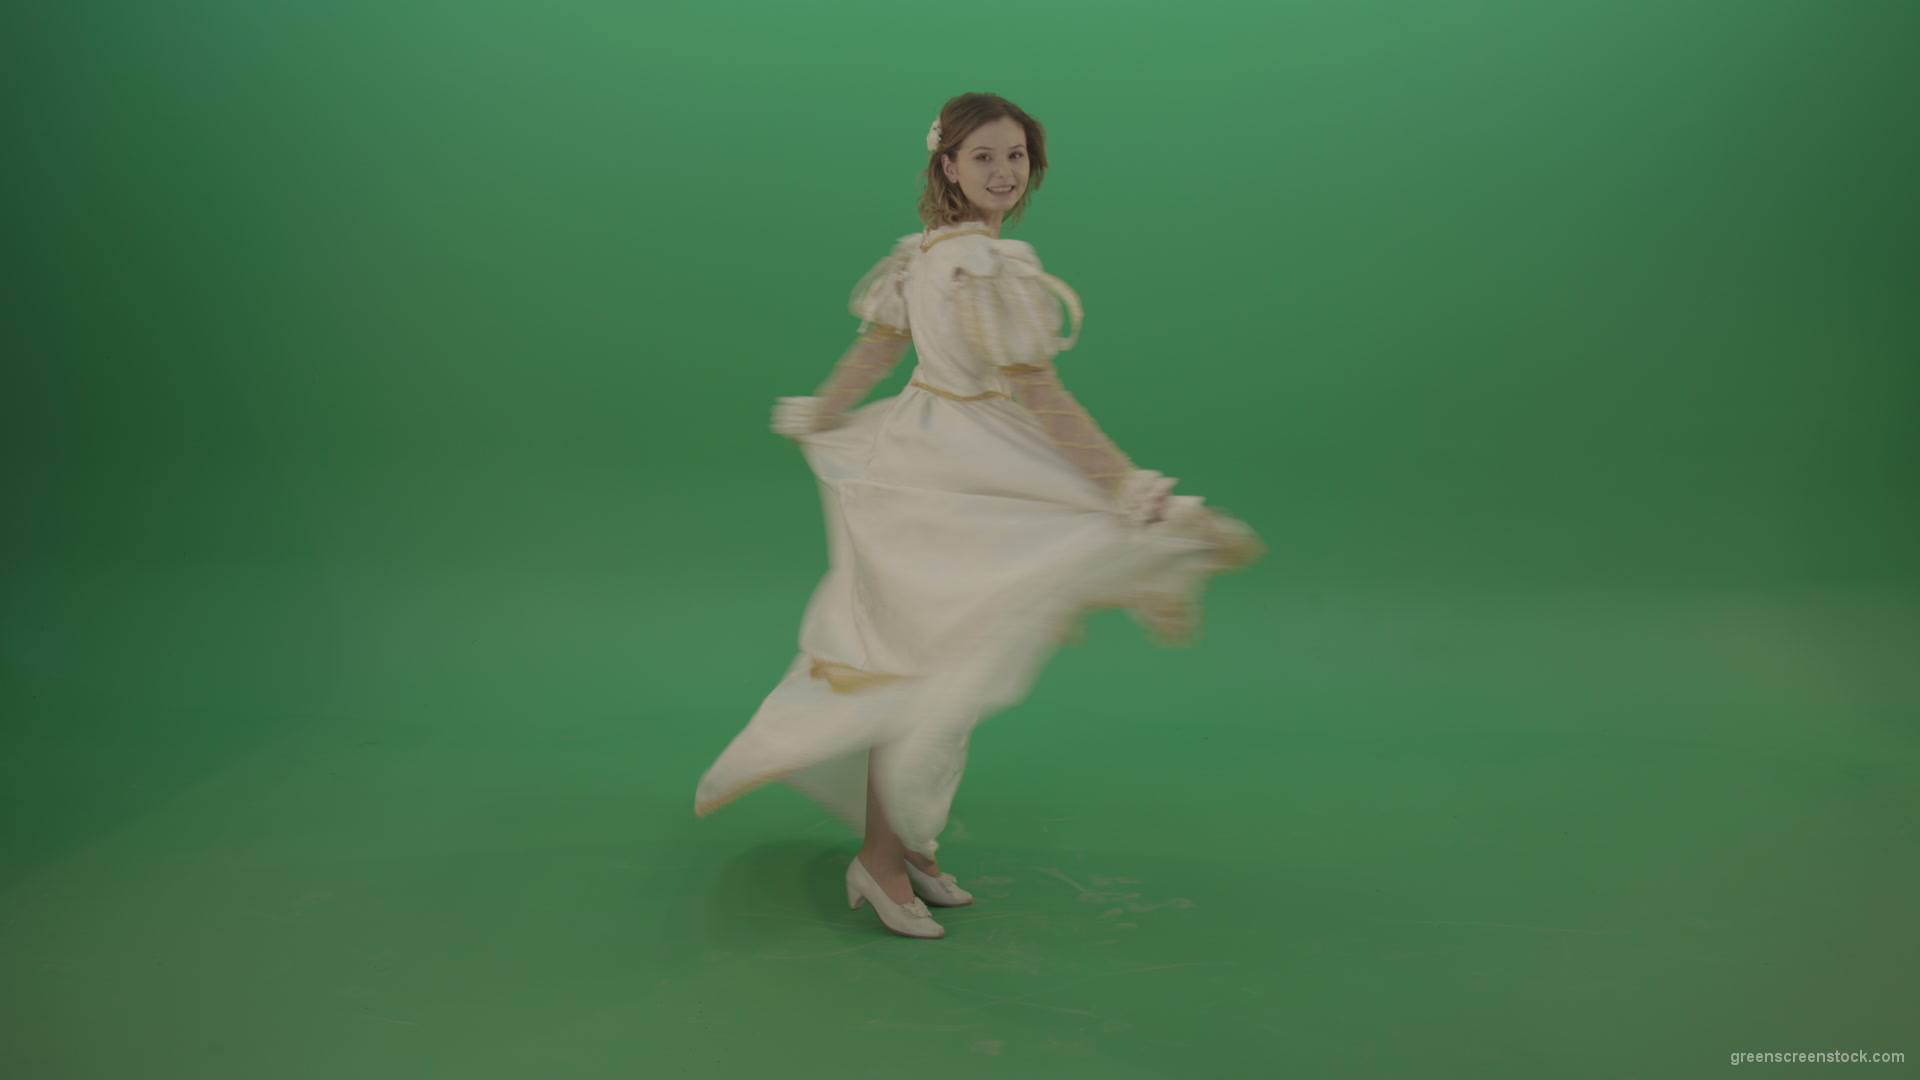 Princess-dances-twisting-around-the-circle-isolated-on-chromakey-background_006 Green Screen Stock